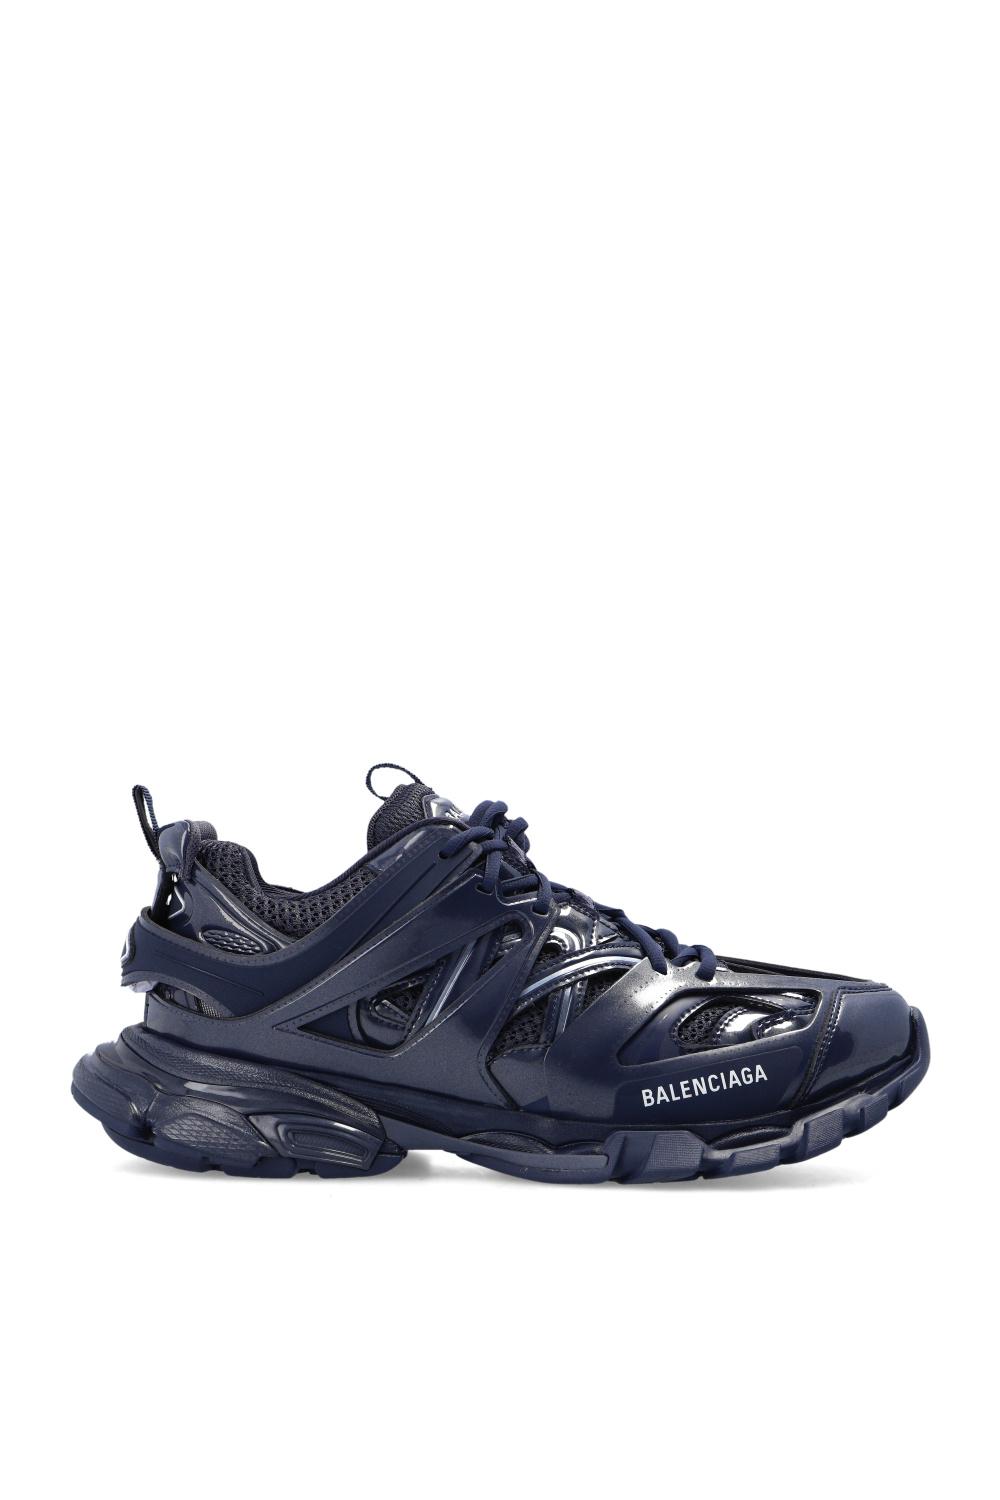 Balenciaga 'track' Sneakers in Navy Blue (Blue) for Men | Lyst